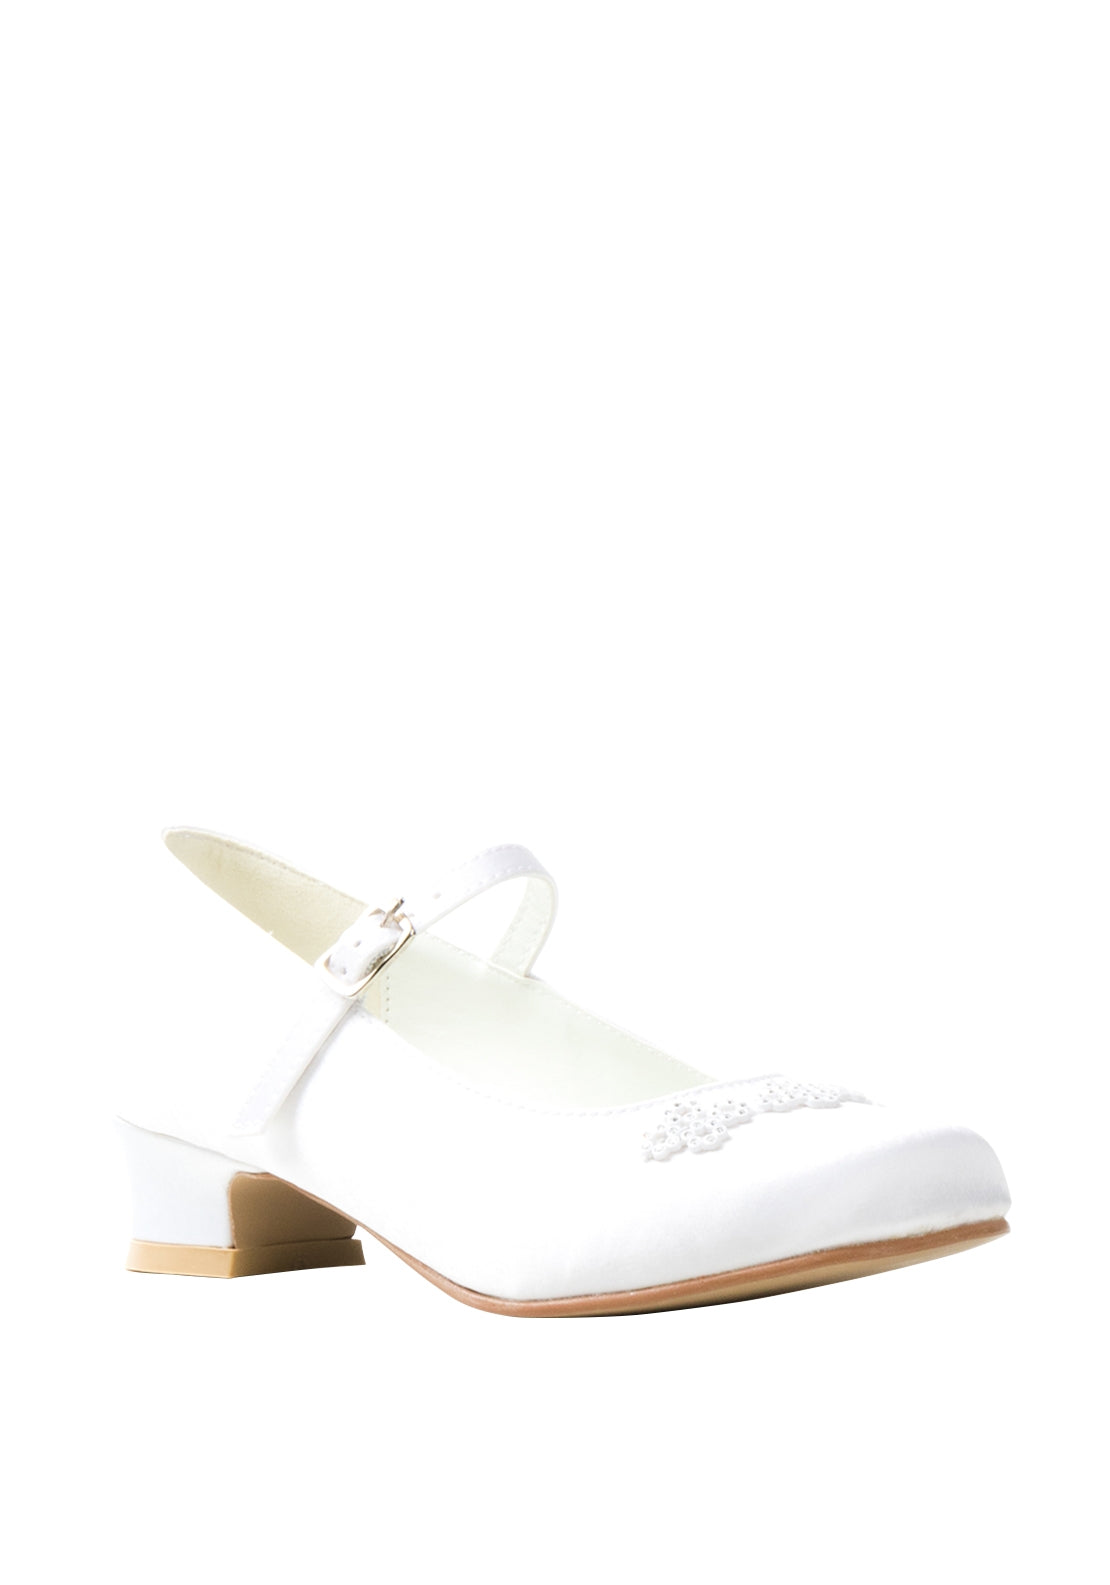 Girls White Satin Communion Shoes with Heel and Strap